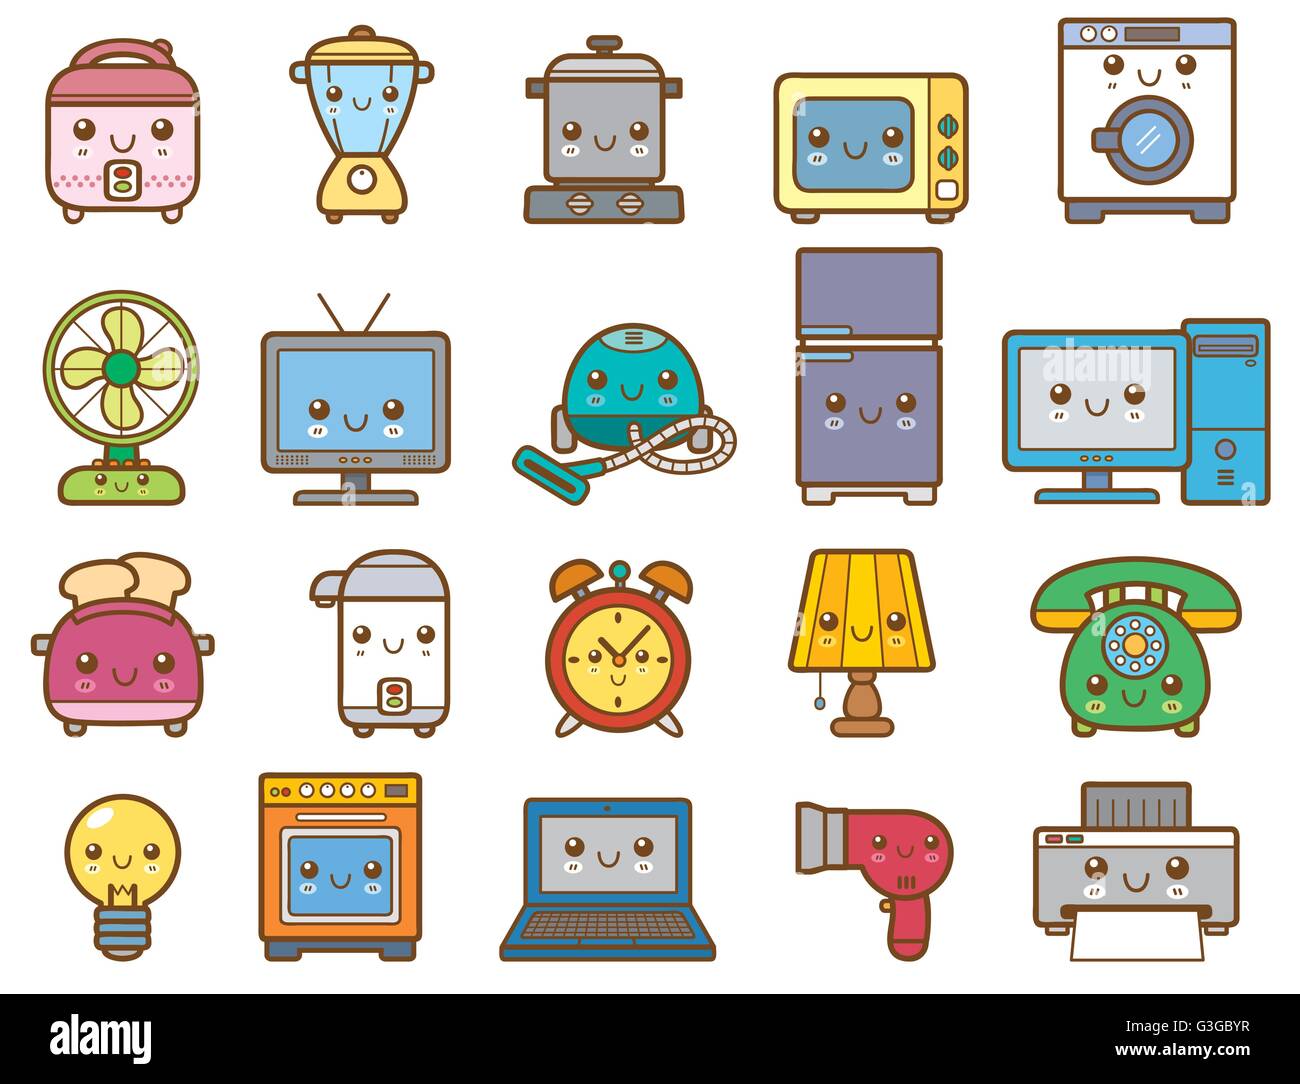 Vector Illustration of Home appliances and electronics Stock Vector